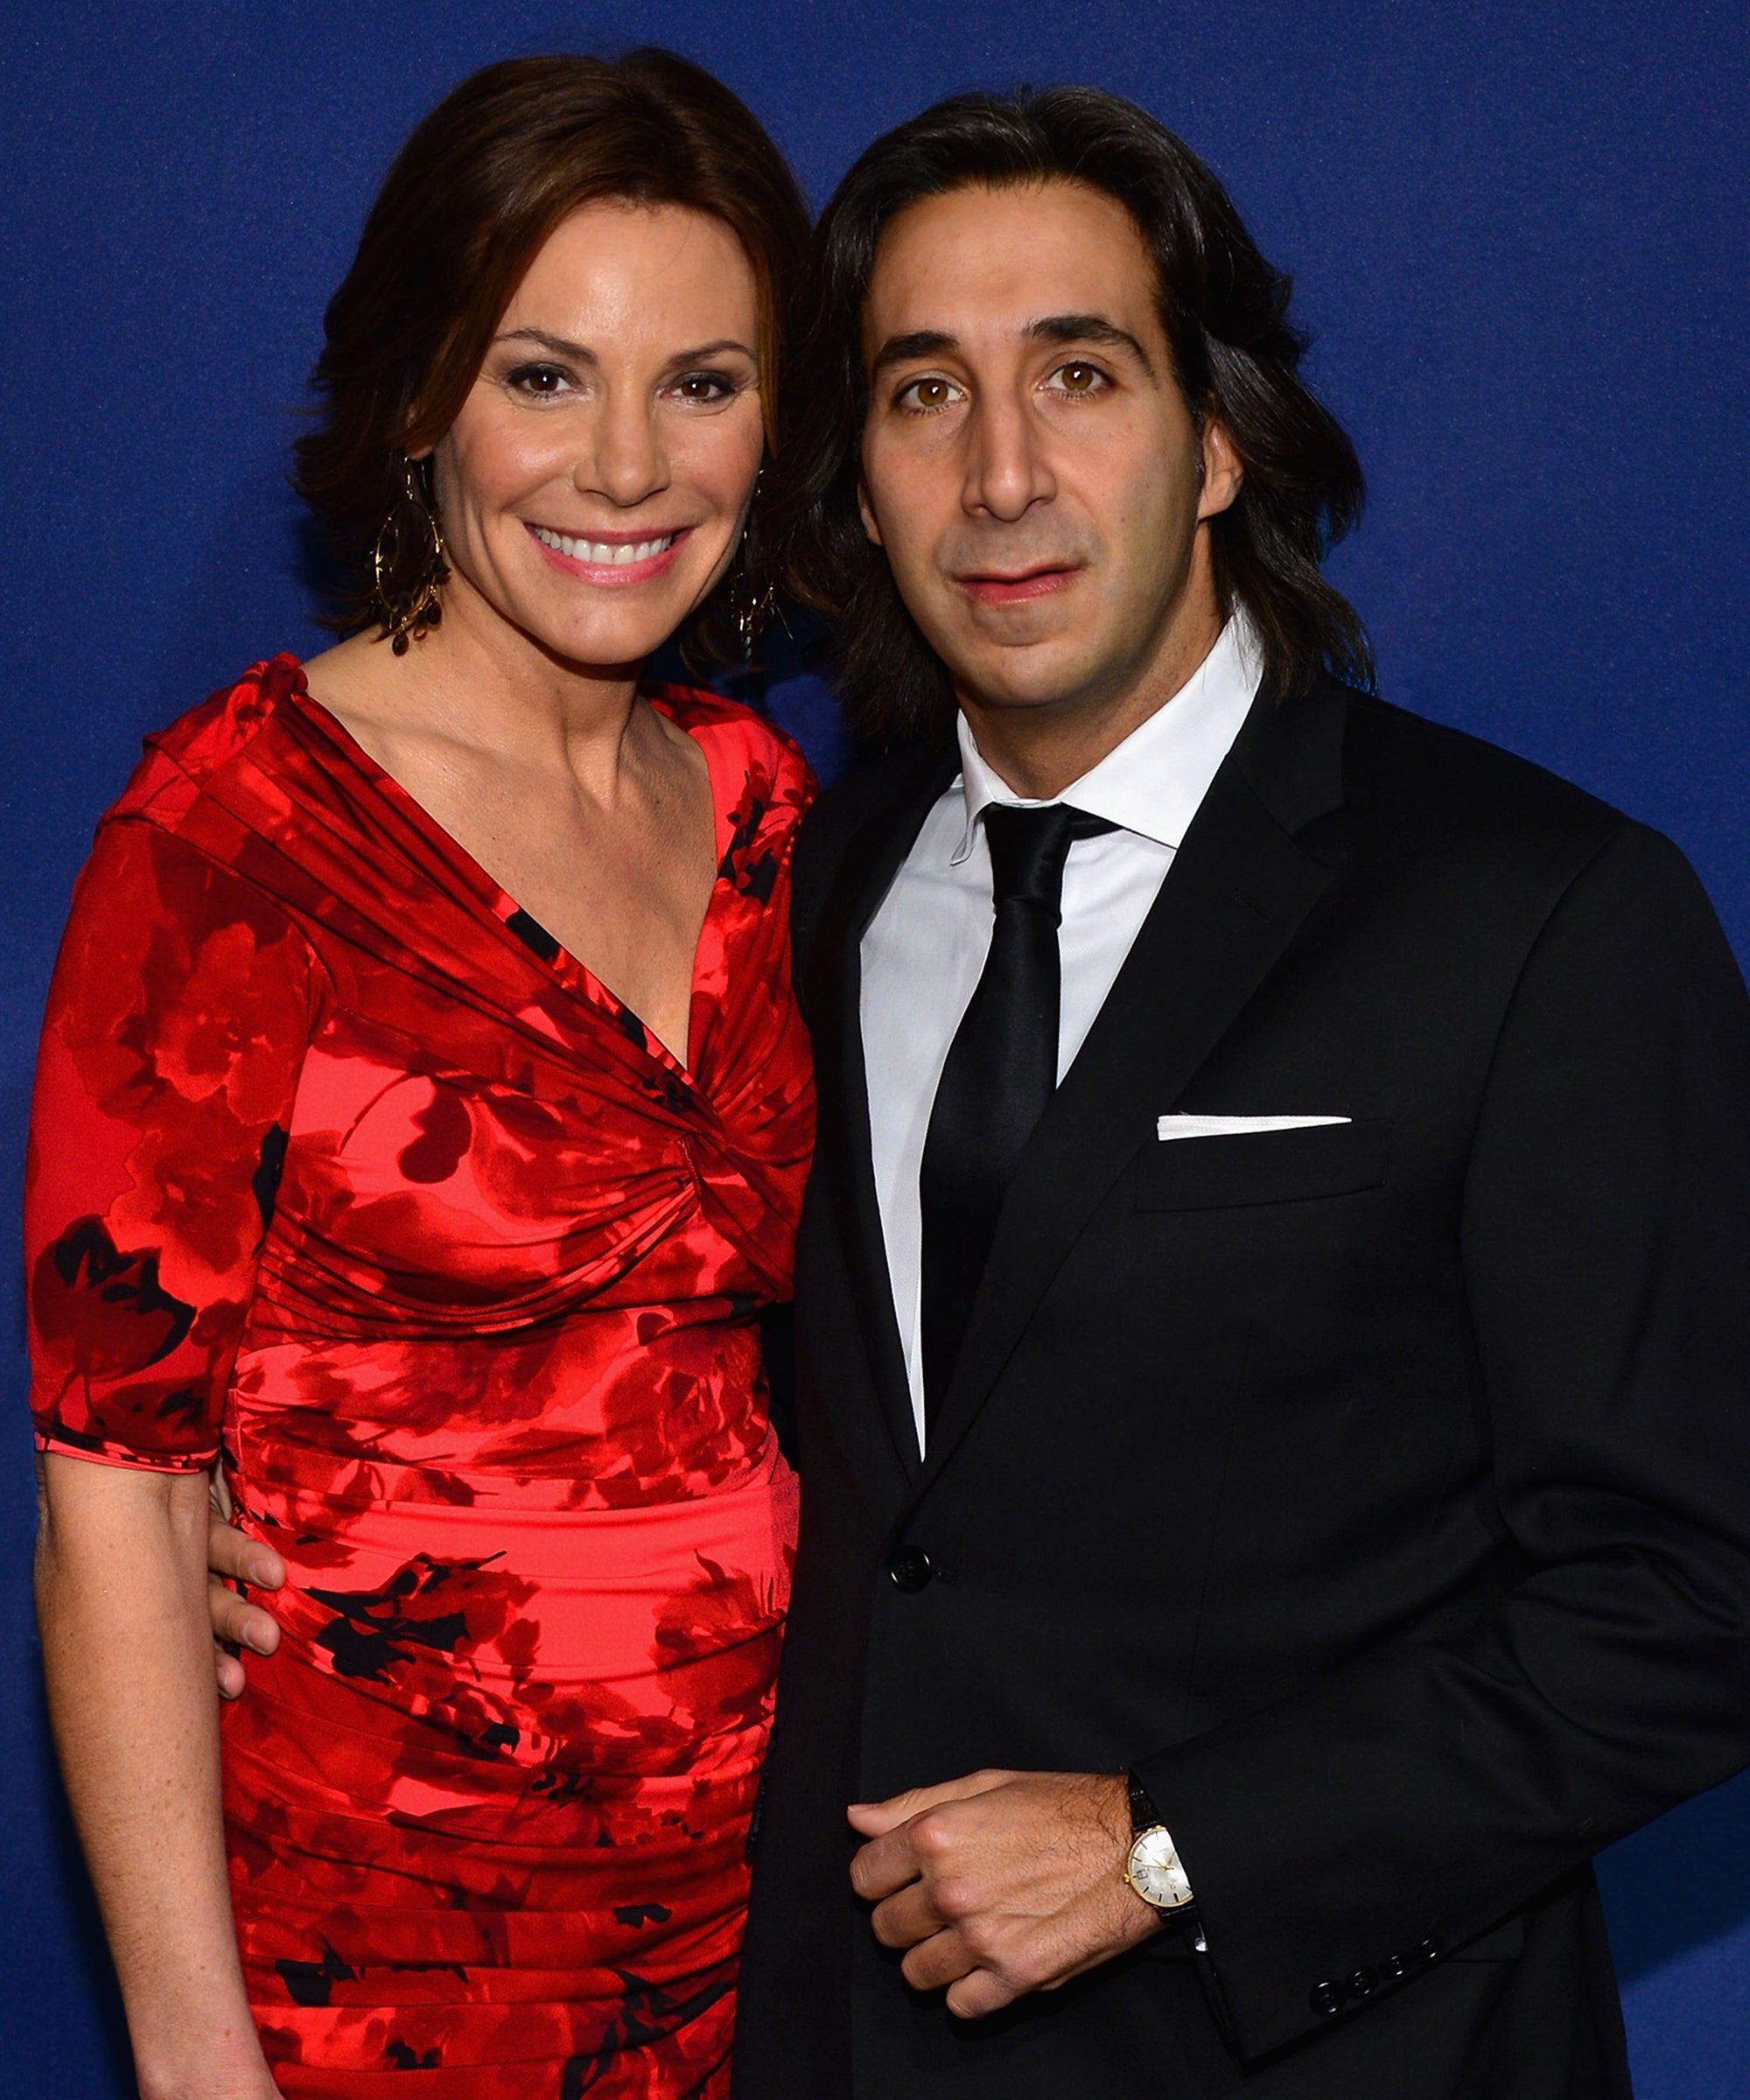 When Did Luann And Jacques Break Up On Real Housewives? picture pic